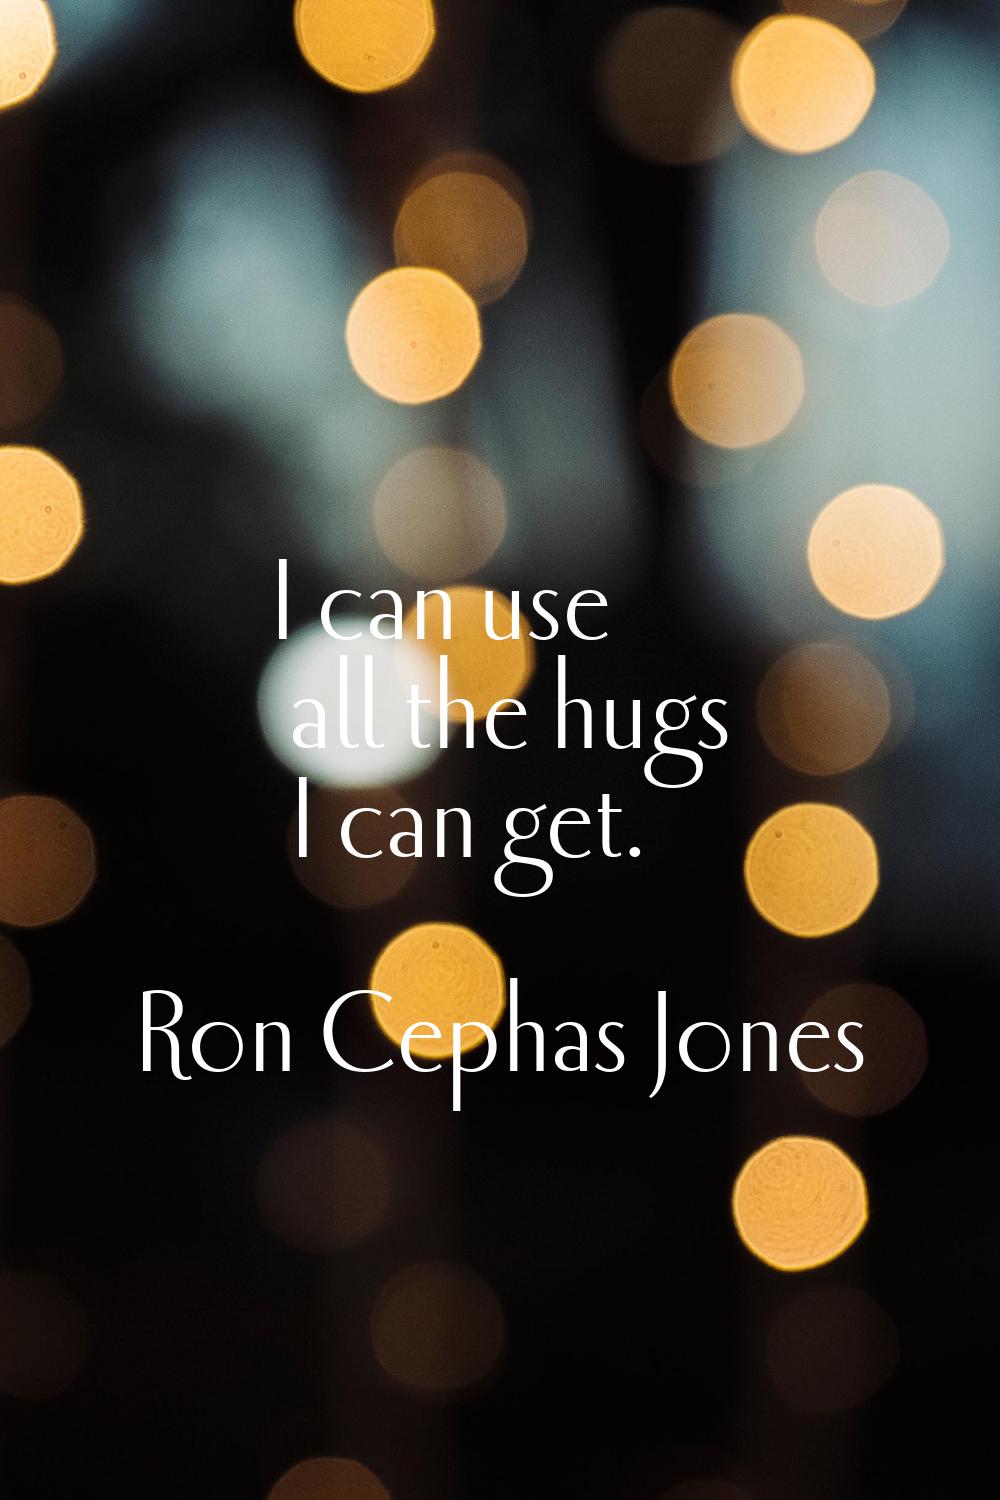 I can use all the hugs I can get.